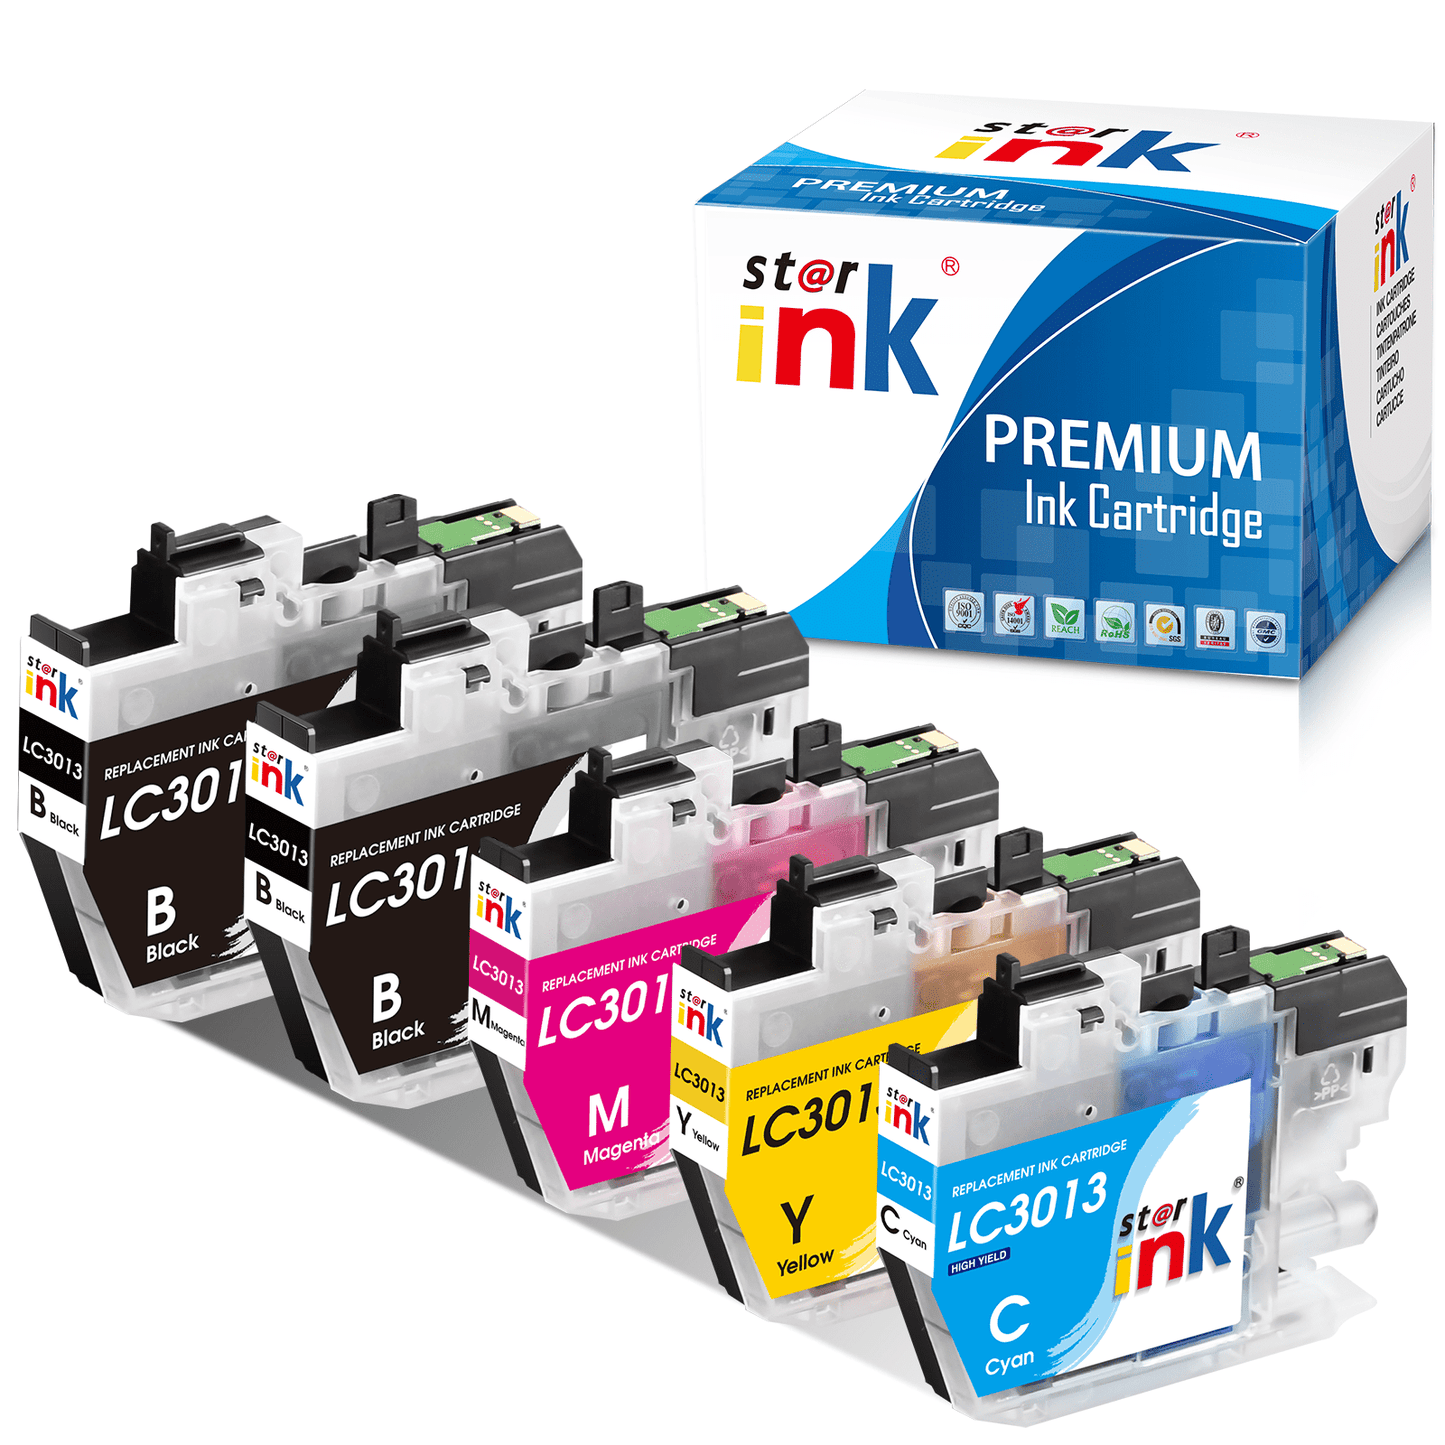 LC3013 Ink Replacement for Brother Ink Cartridge LC3013 LC3011 LC-3013 LC-3011 for Brother MFC-J491DW MFC-J497DW MFC-J895DW MFC-J690DW Printer (2 Black, 1 Cyan, 1 Magenta, 1 Yellow, 5 Pack)